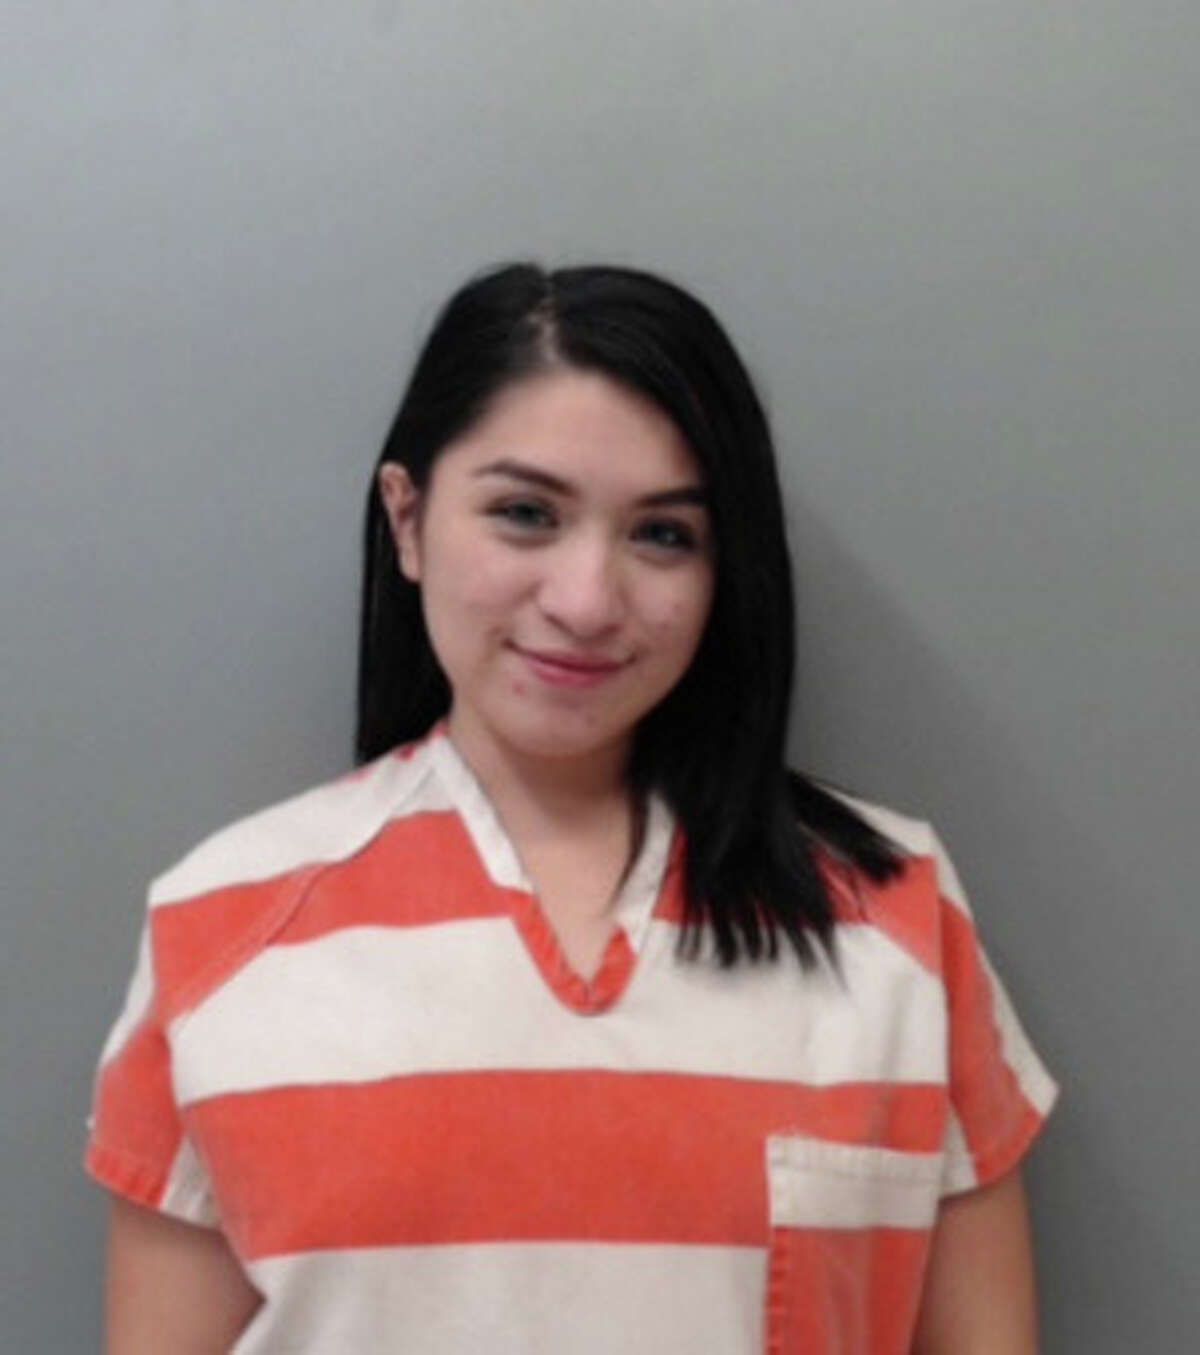 Rosemary Centeno, 21, was charged with assault, four counts of assault on a public servant, resisting arrest and terroristic against a public servant.